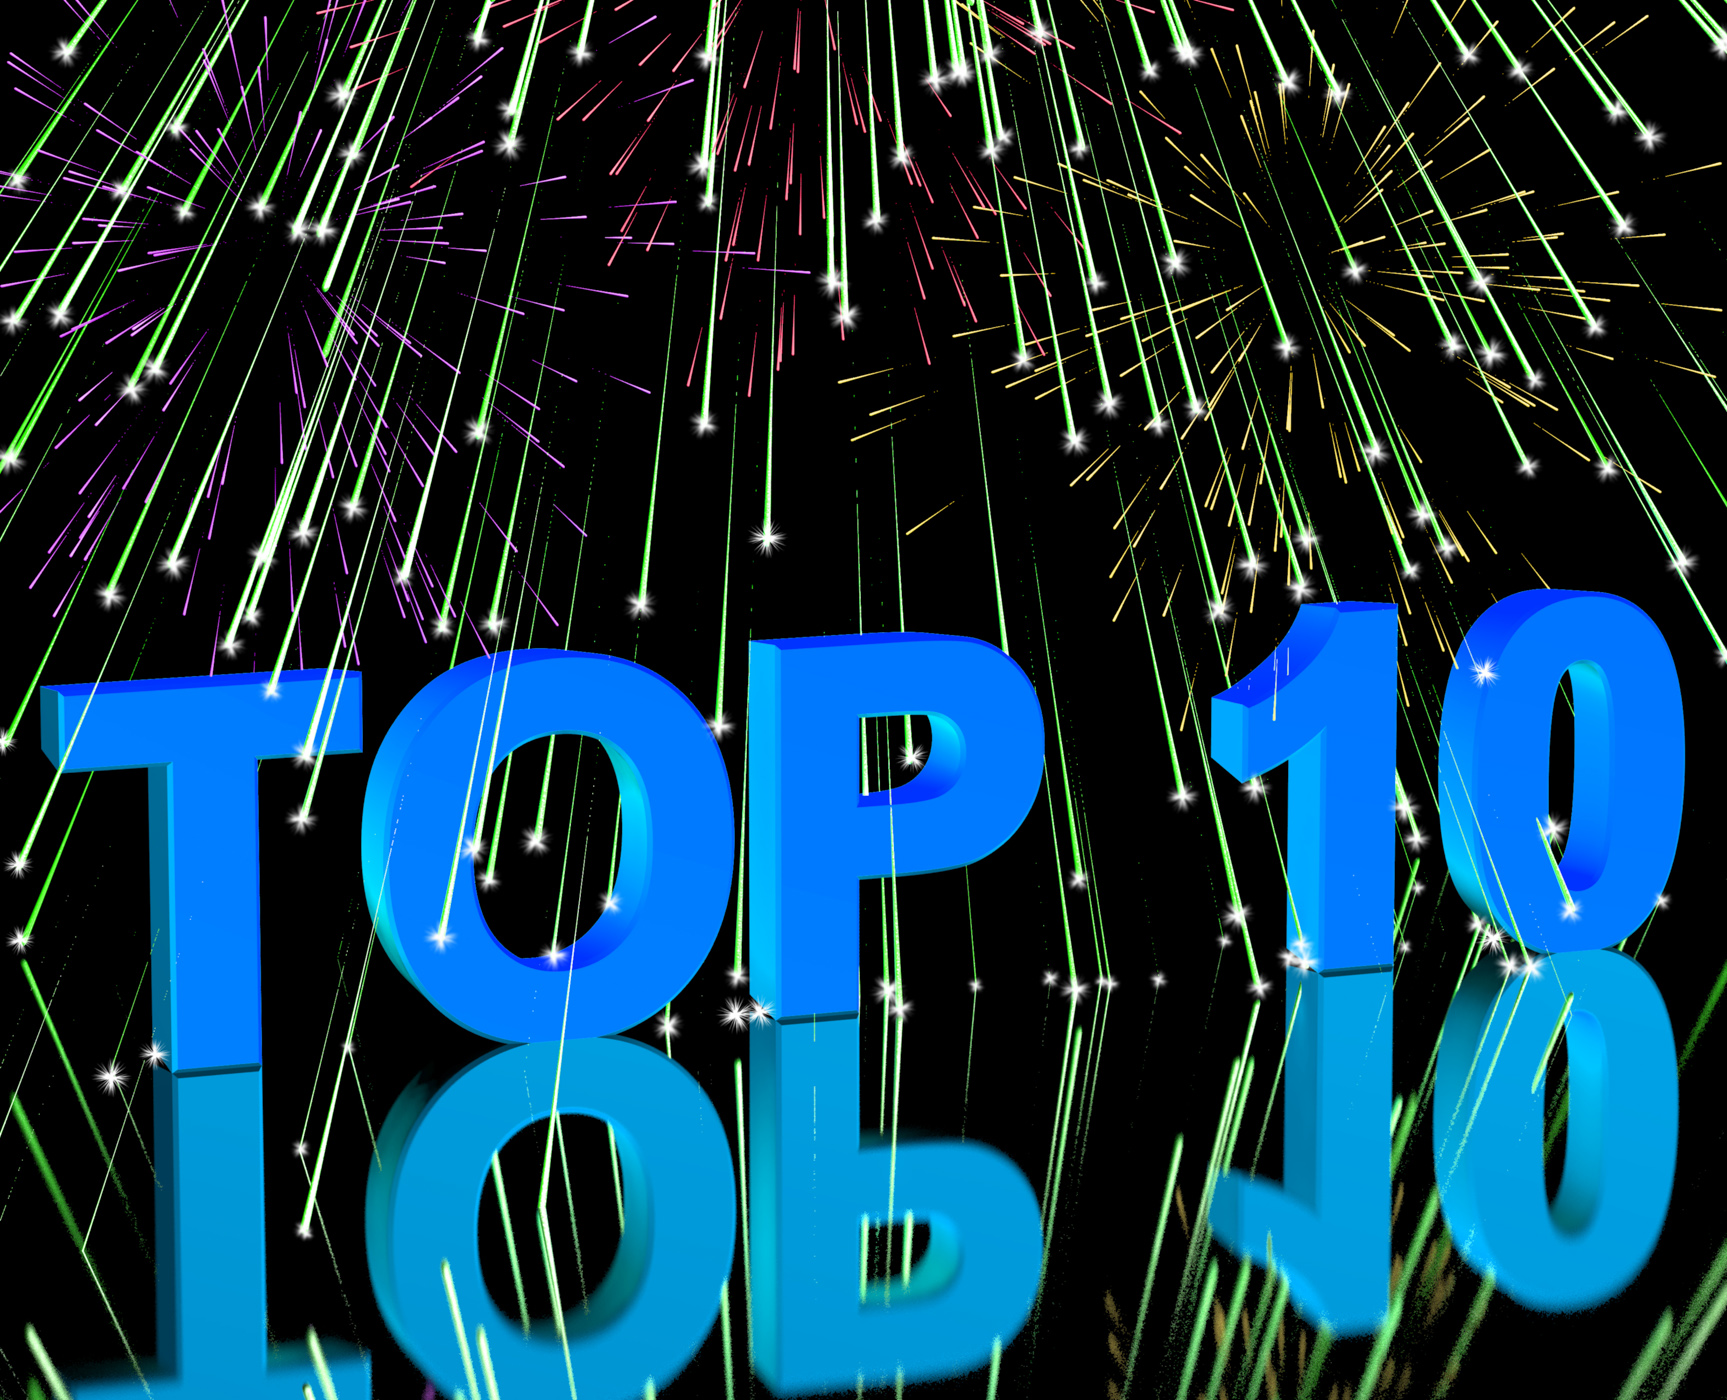 Top ten word and fireworks showing best rated in charts photo